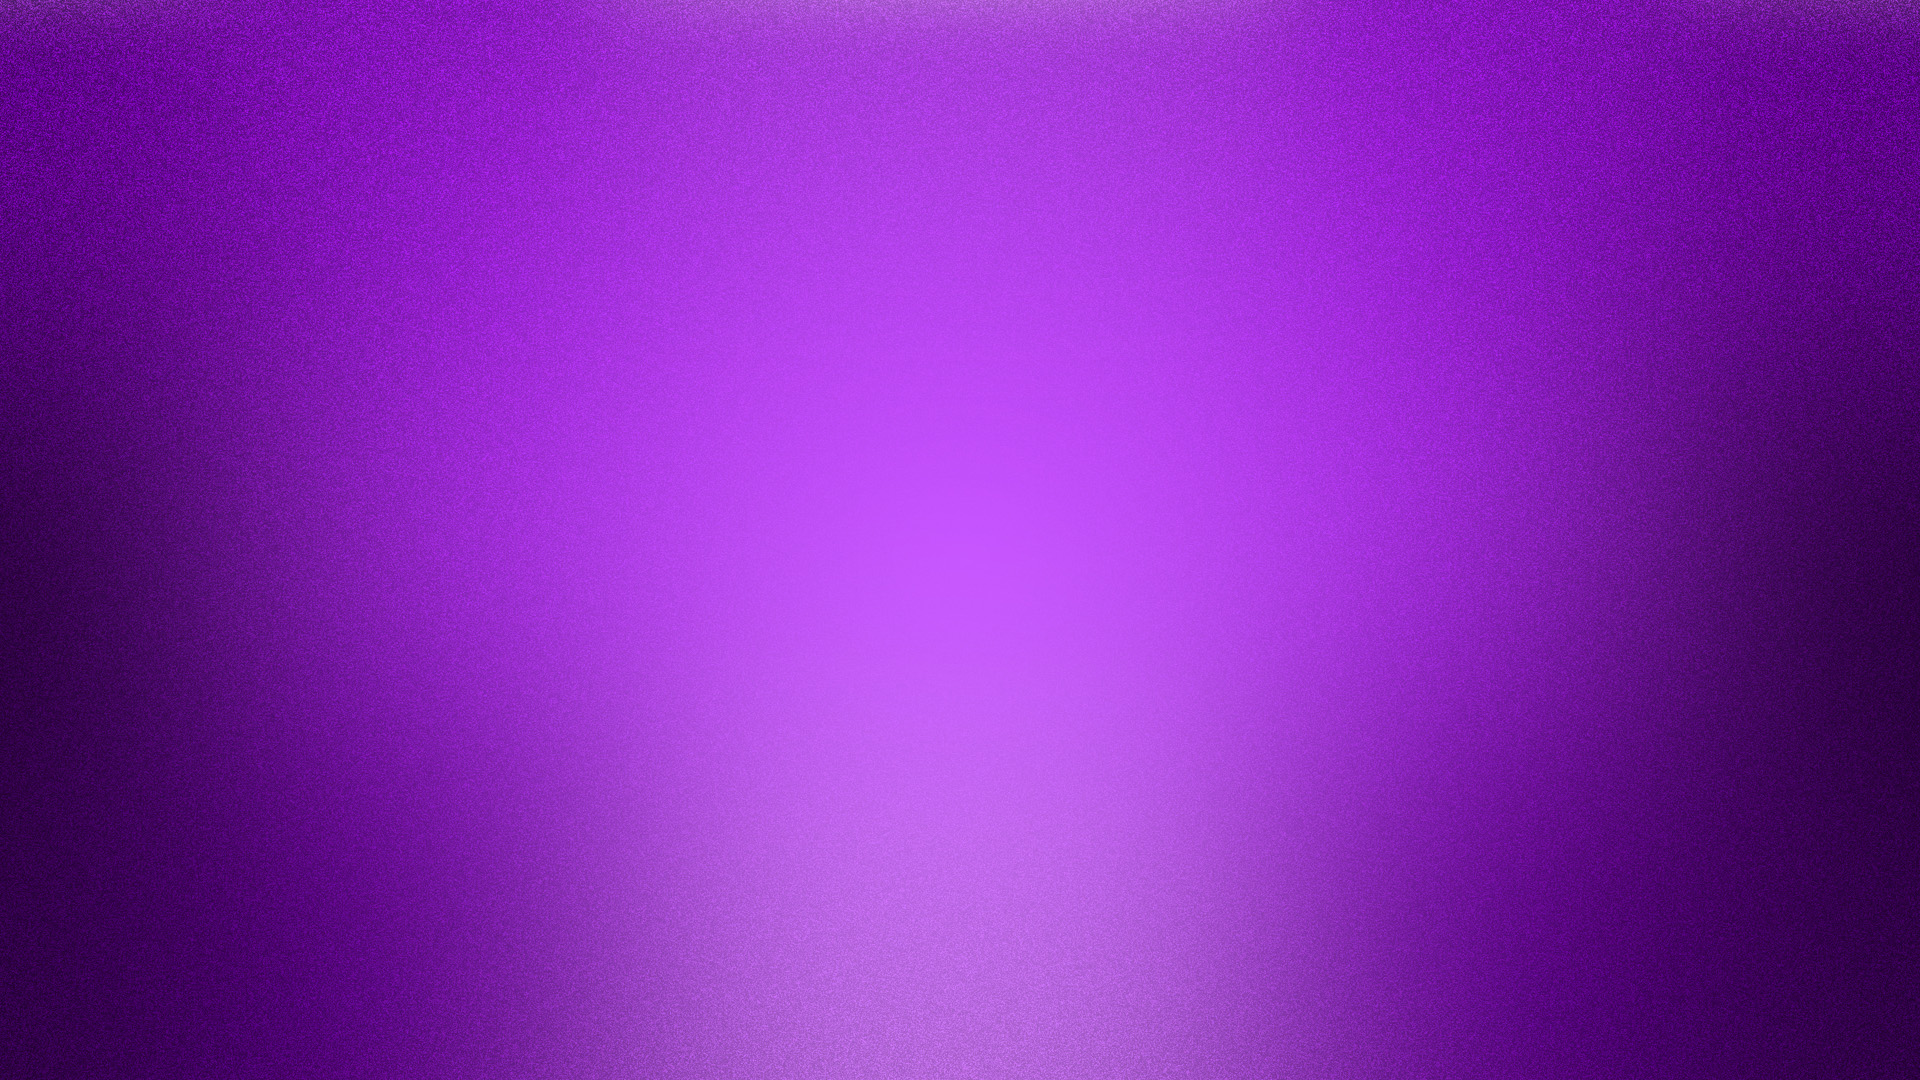 HD Purple Wallpaper Background Images To Download For Free